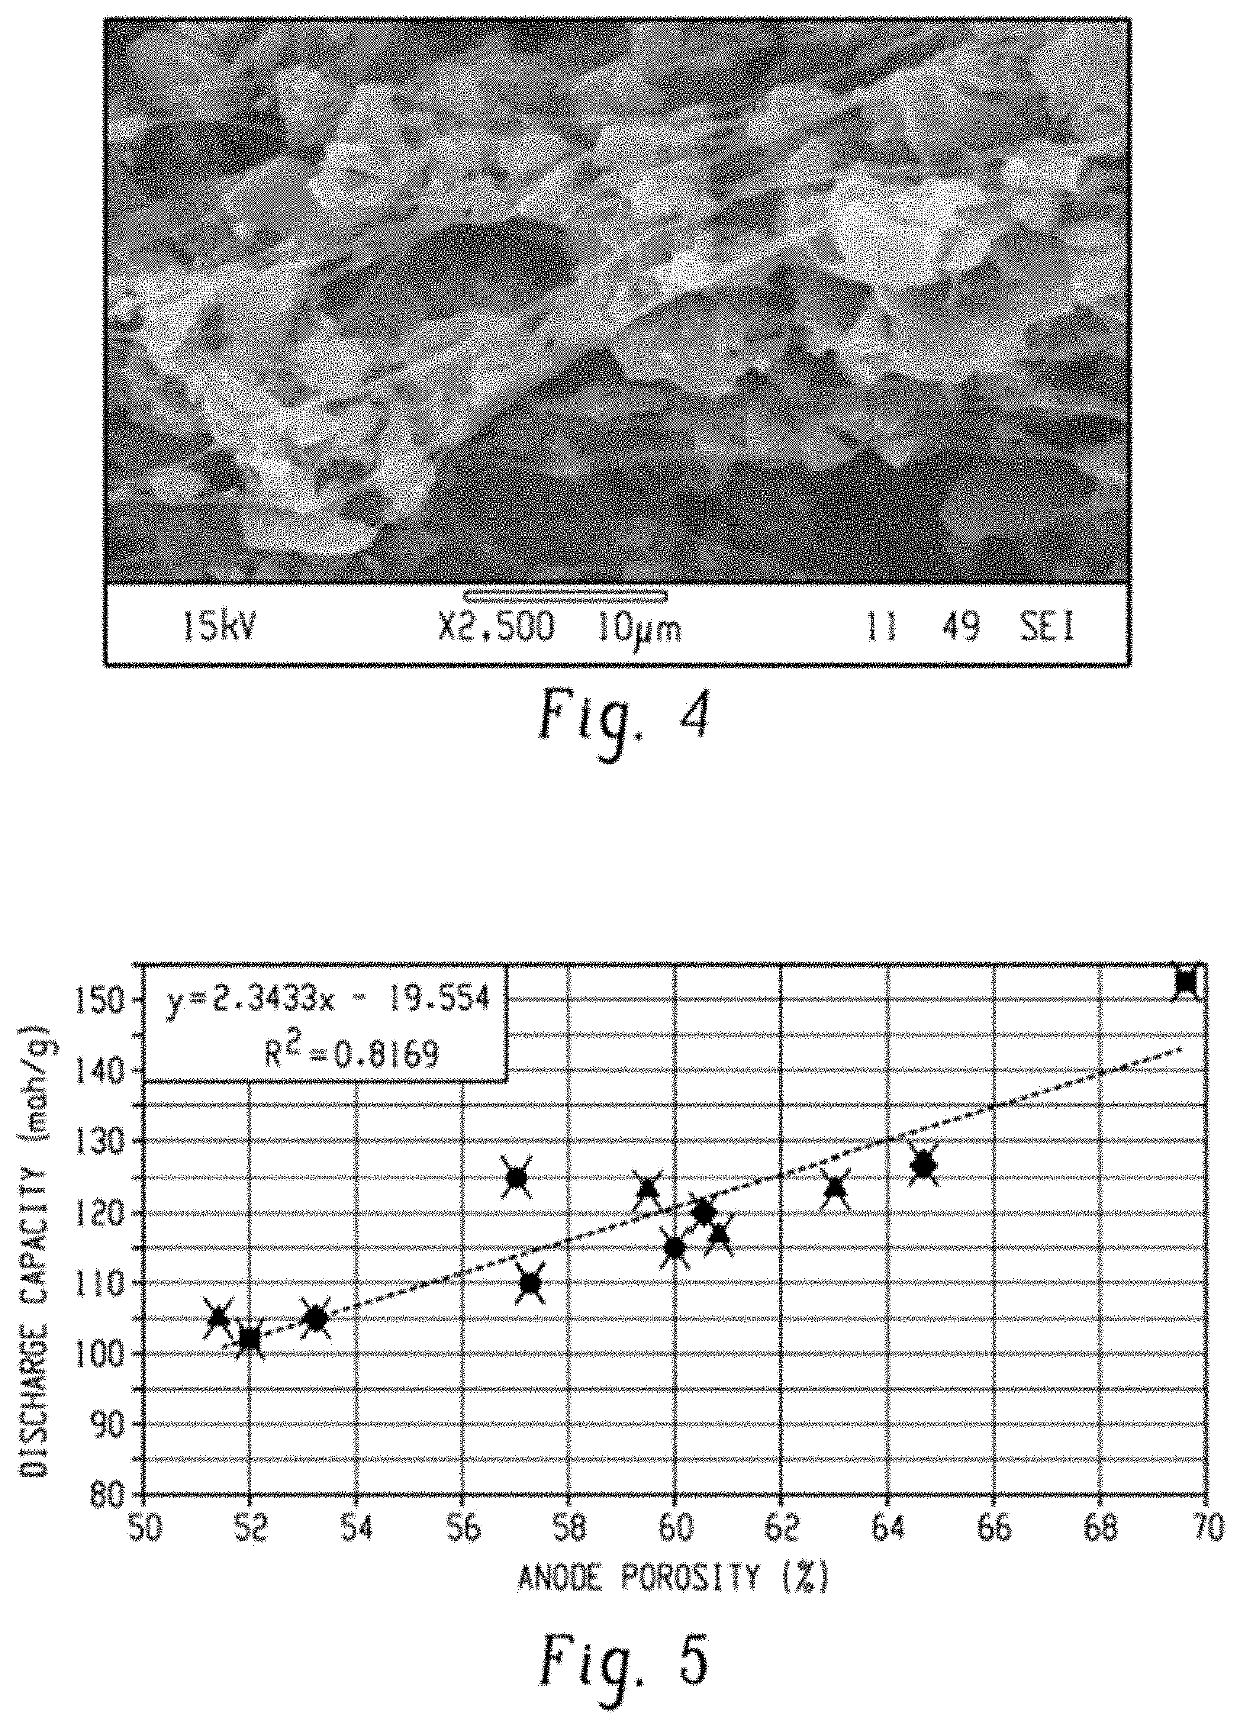 Lead carbon battery comprising an activated carbon anode